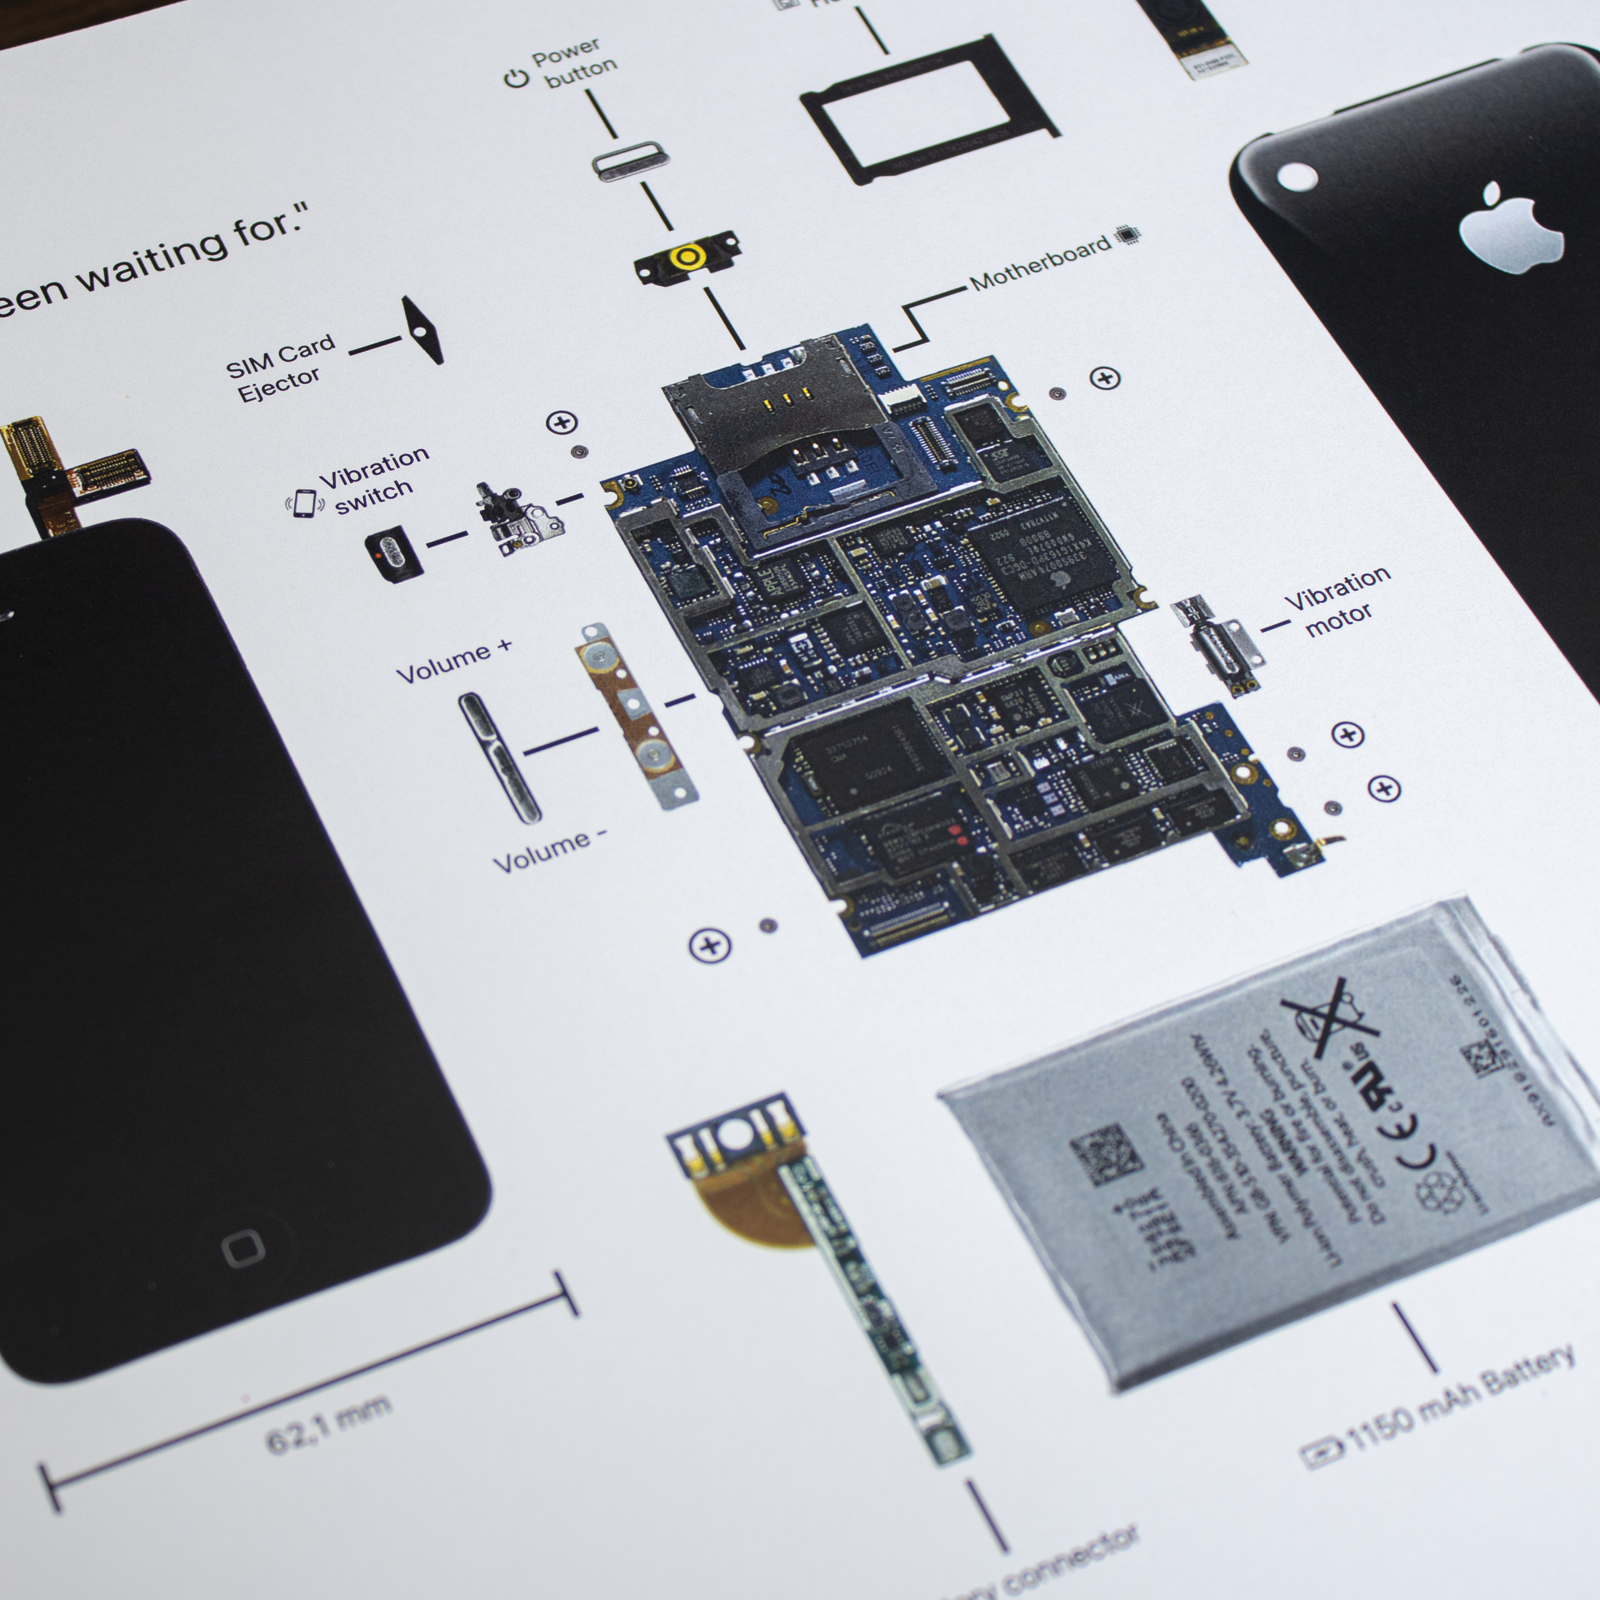 Picture frame of the iPhone 3G parts